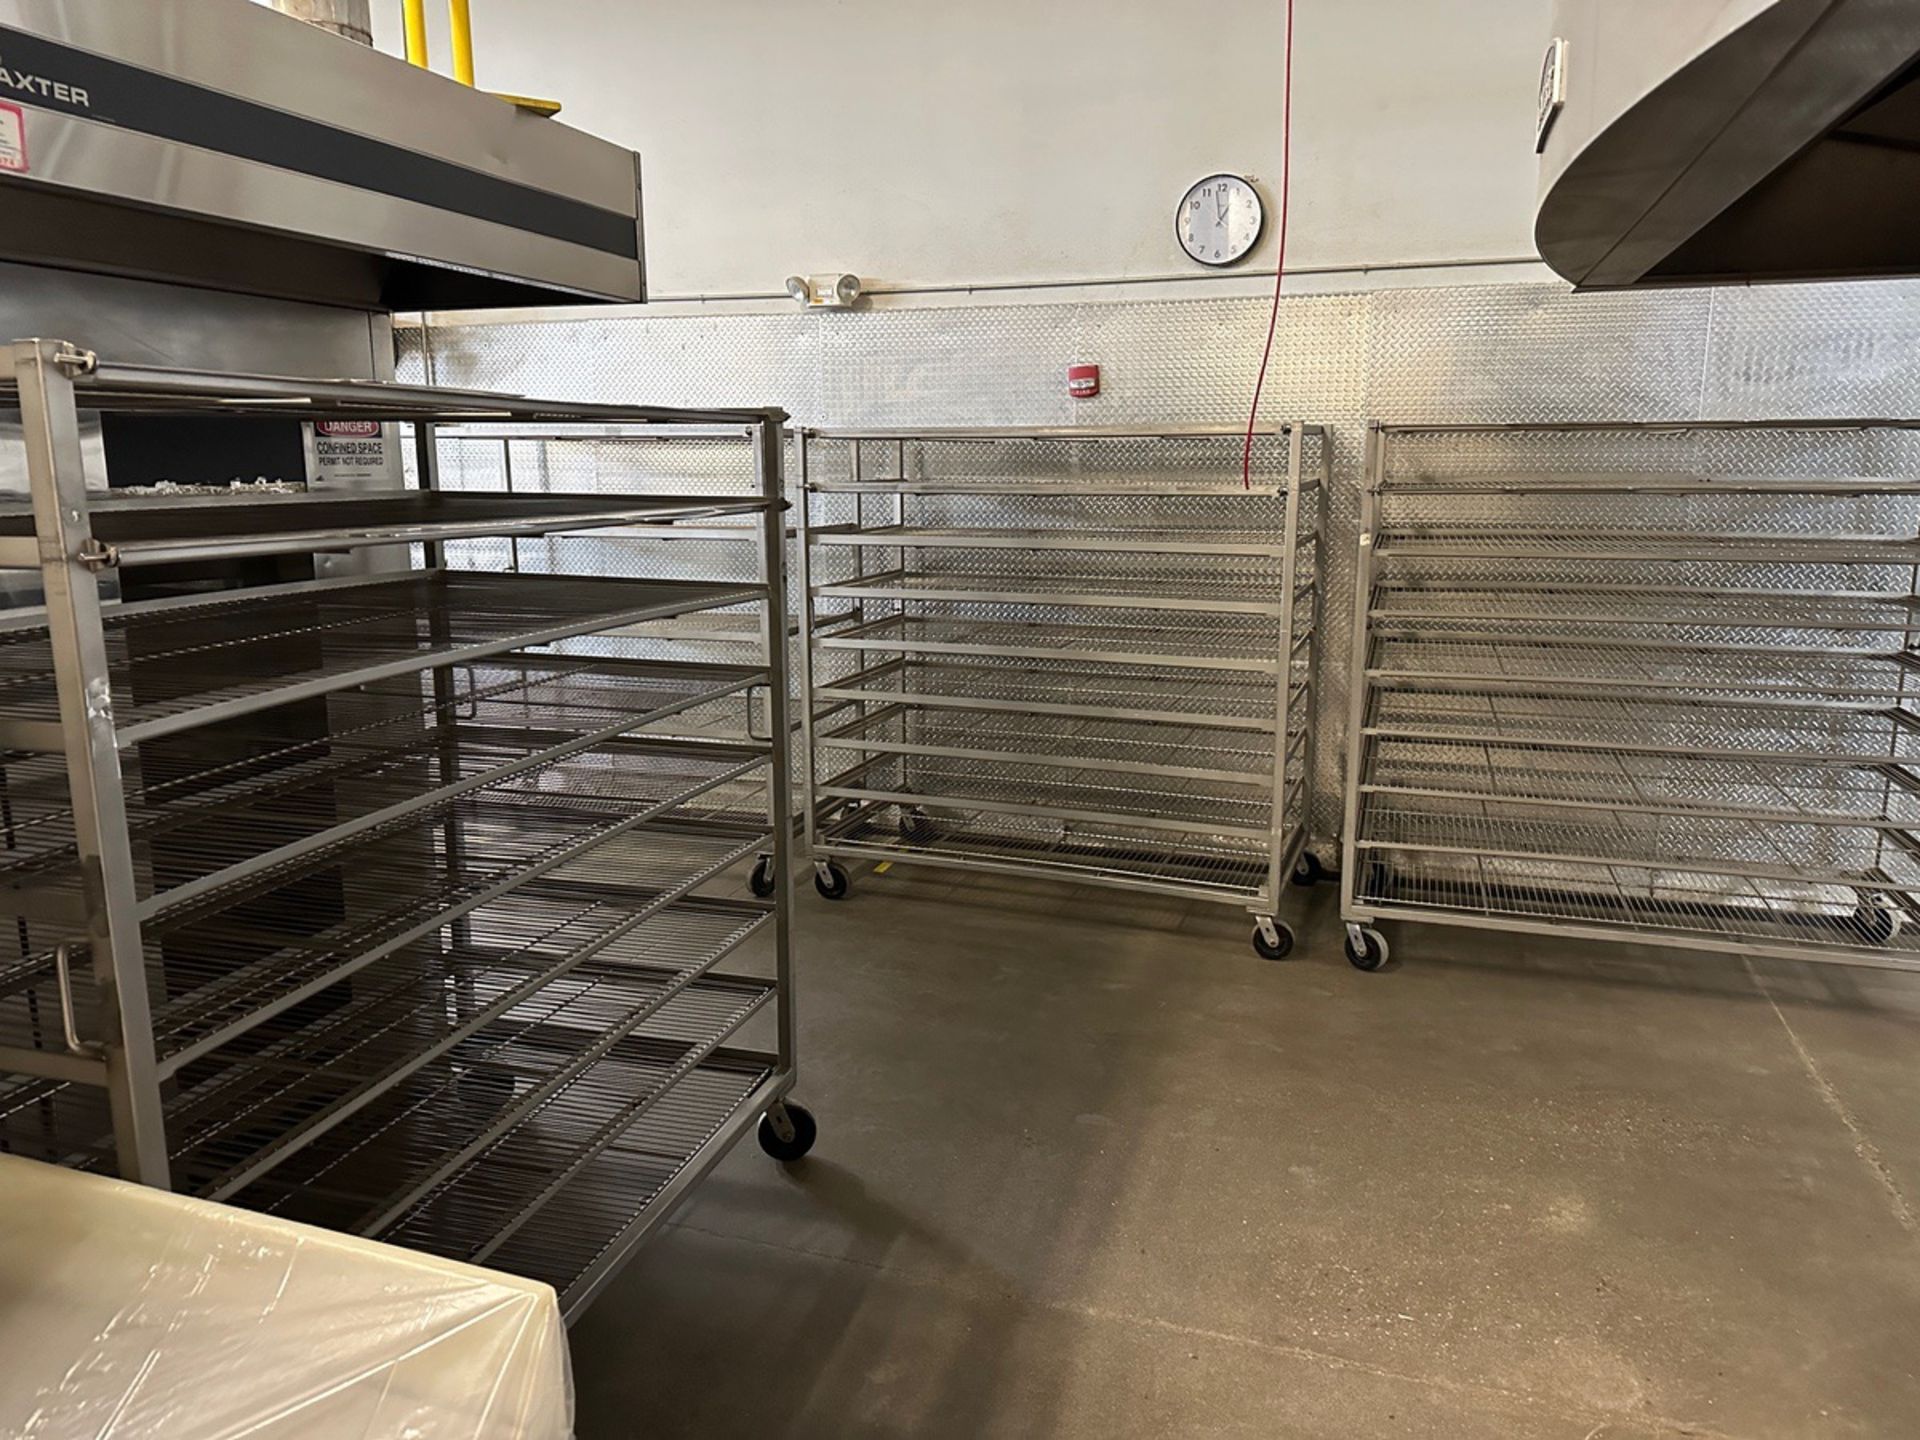 Lot of (4) Stainless Steel Wire Rack Carts (Approx. 39.5" x 75.5" x 76" O.H.) | Rig Fee $100